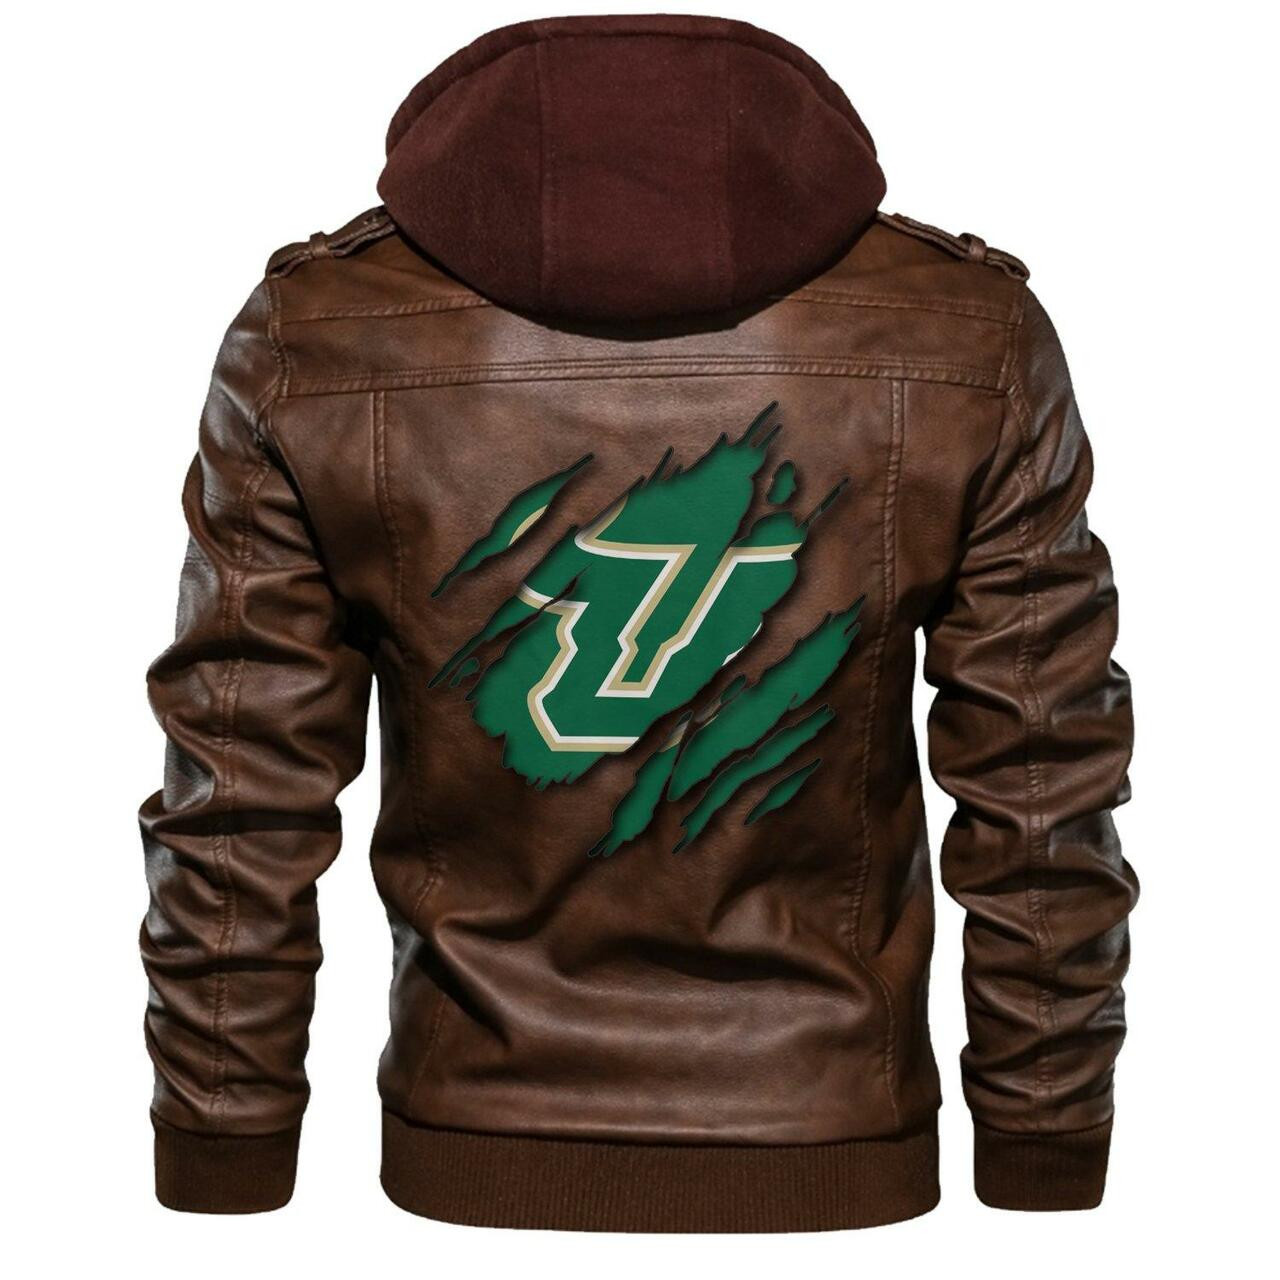 Nice leather jacket For you 142